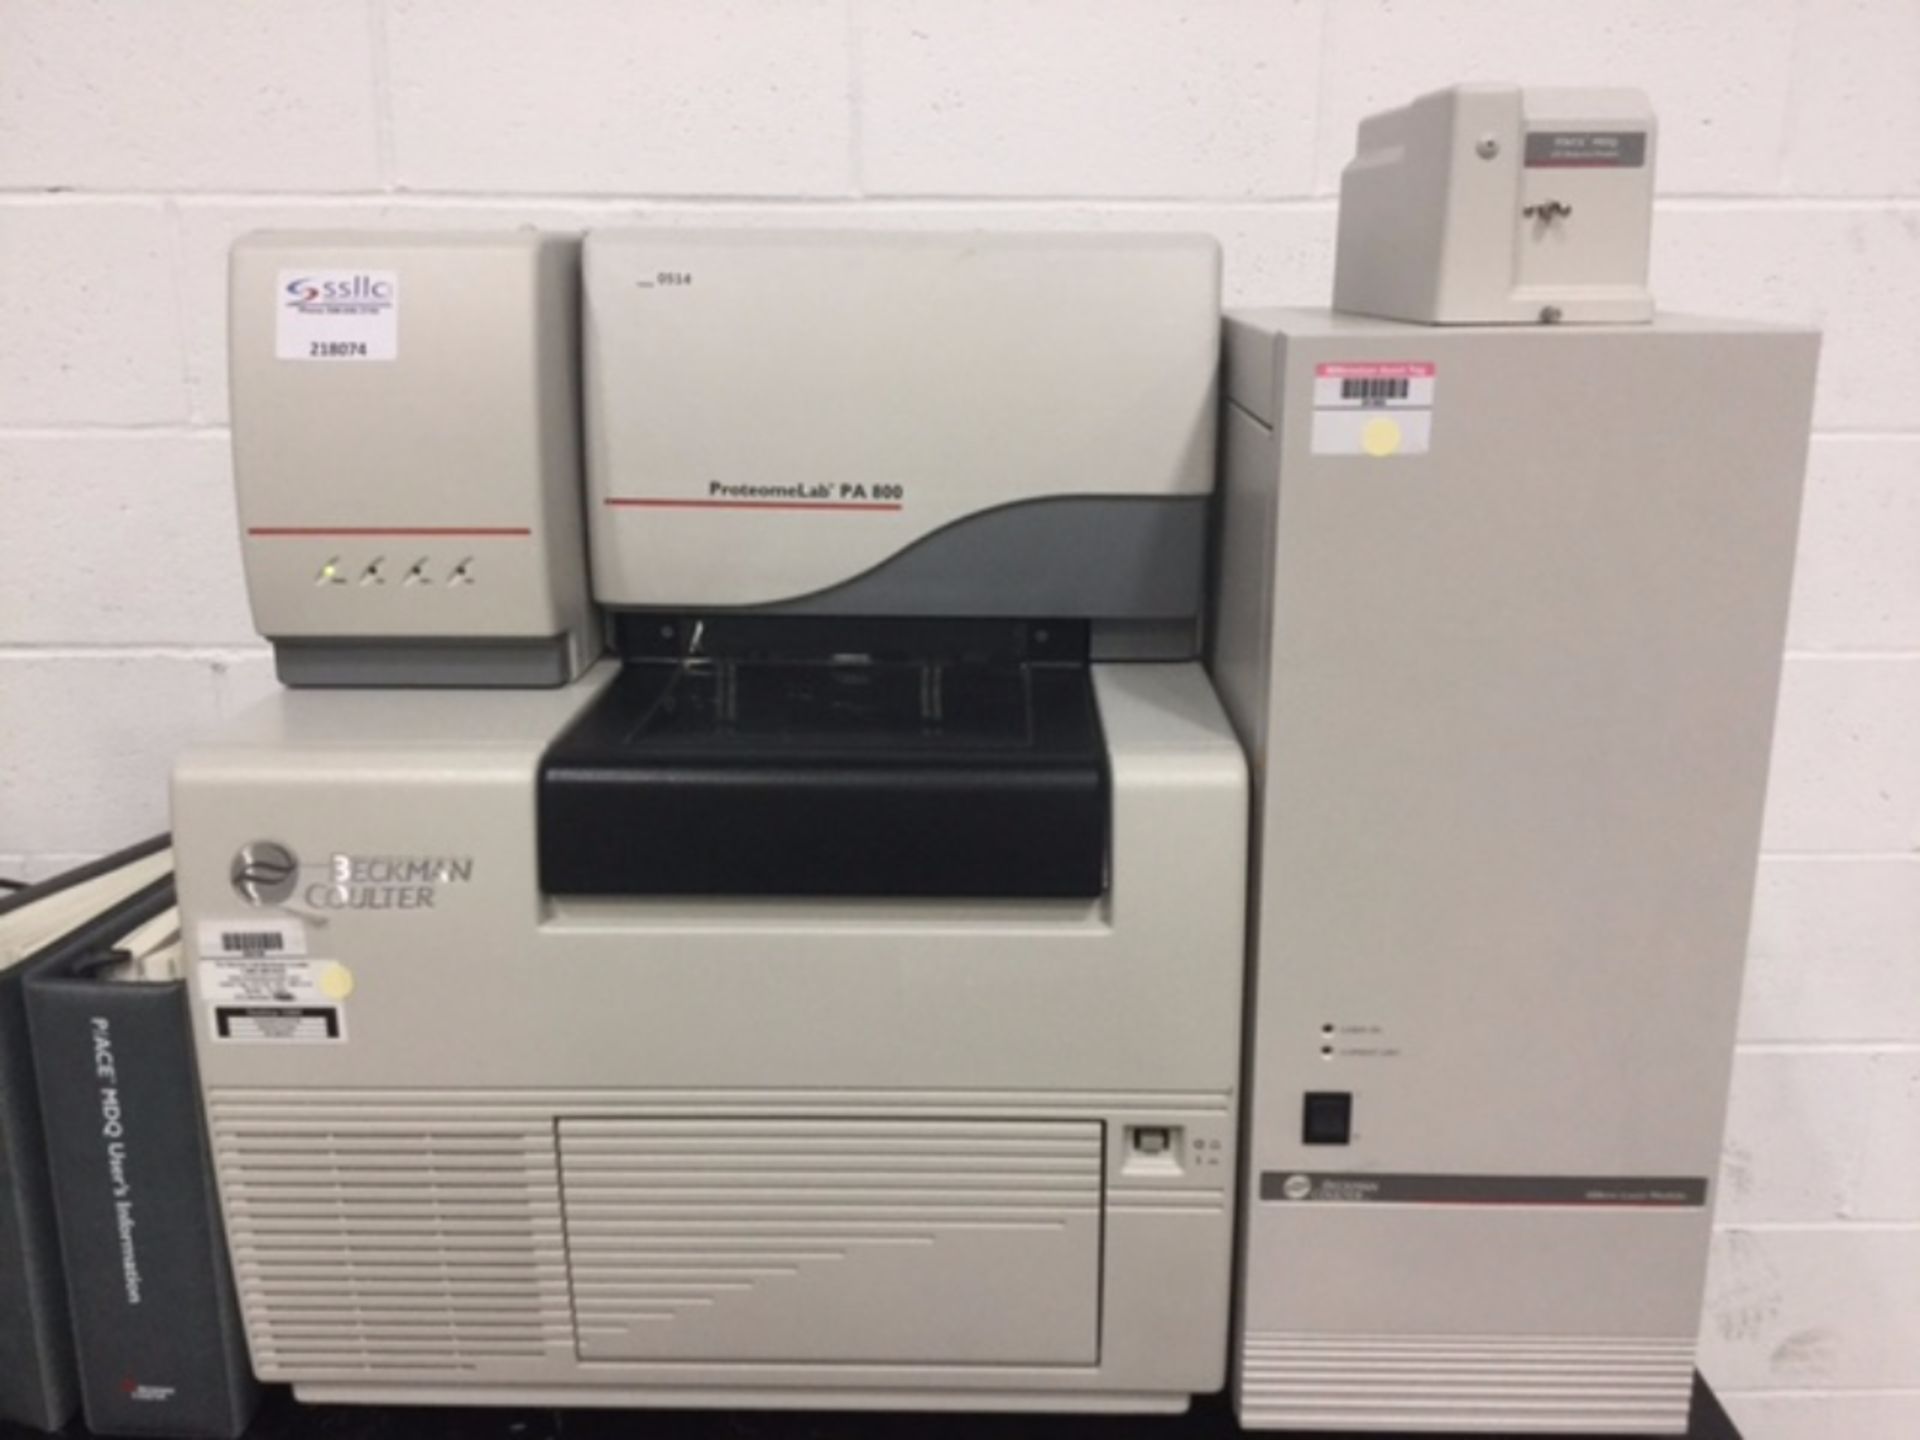 Beckman Coulter ProteomeLab PA 800 Protein Characterization System - Image 2 of 10